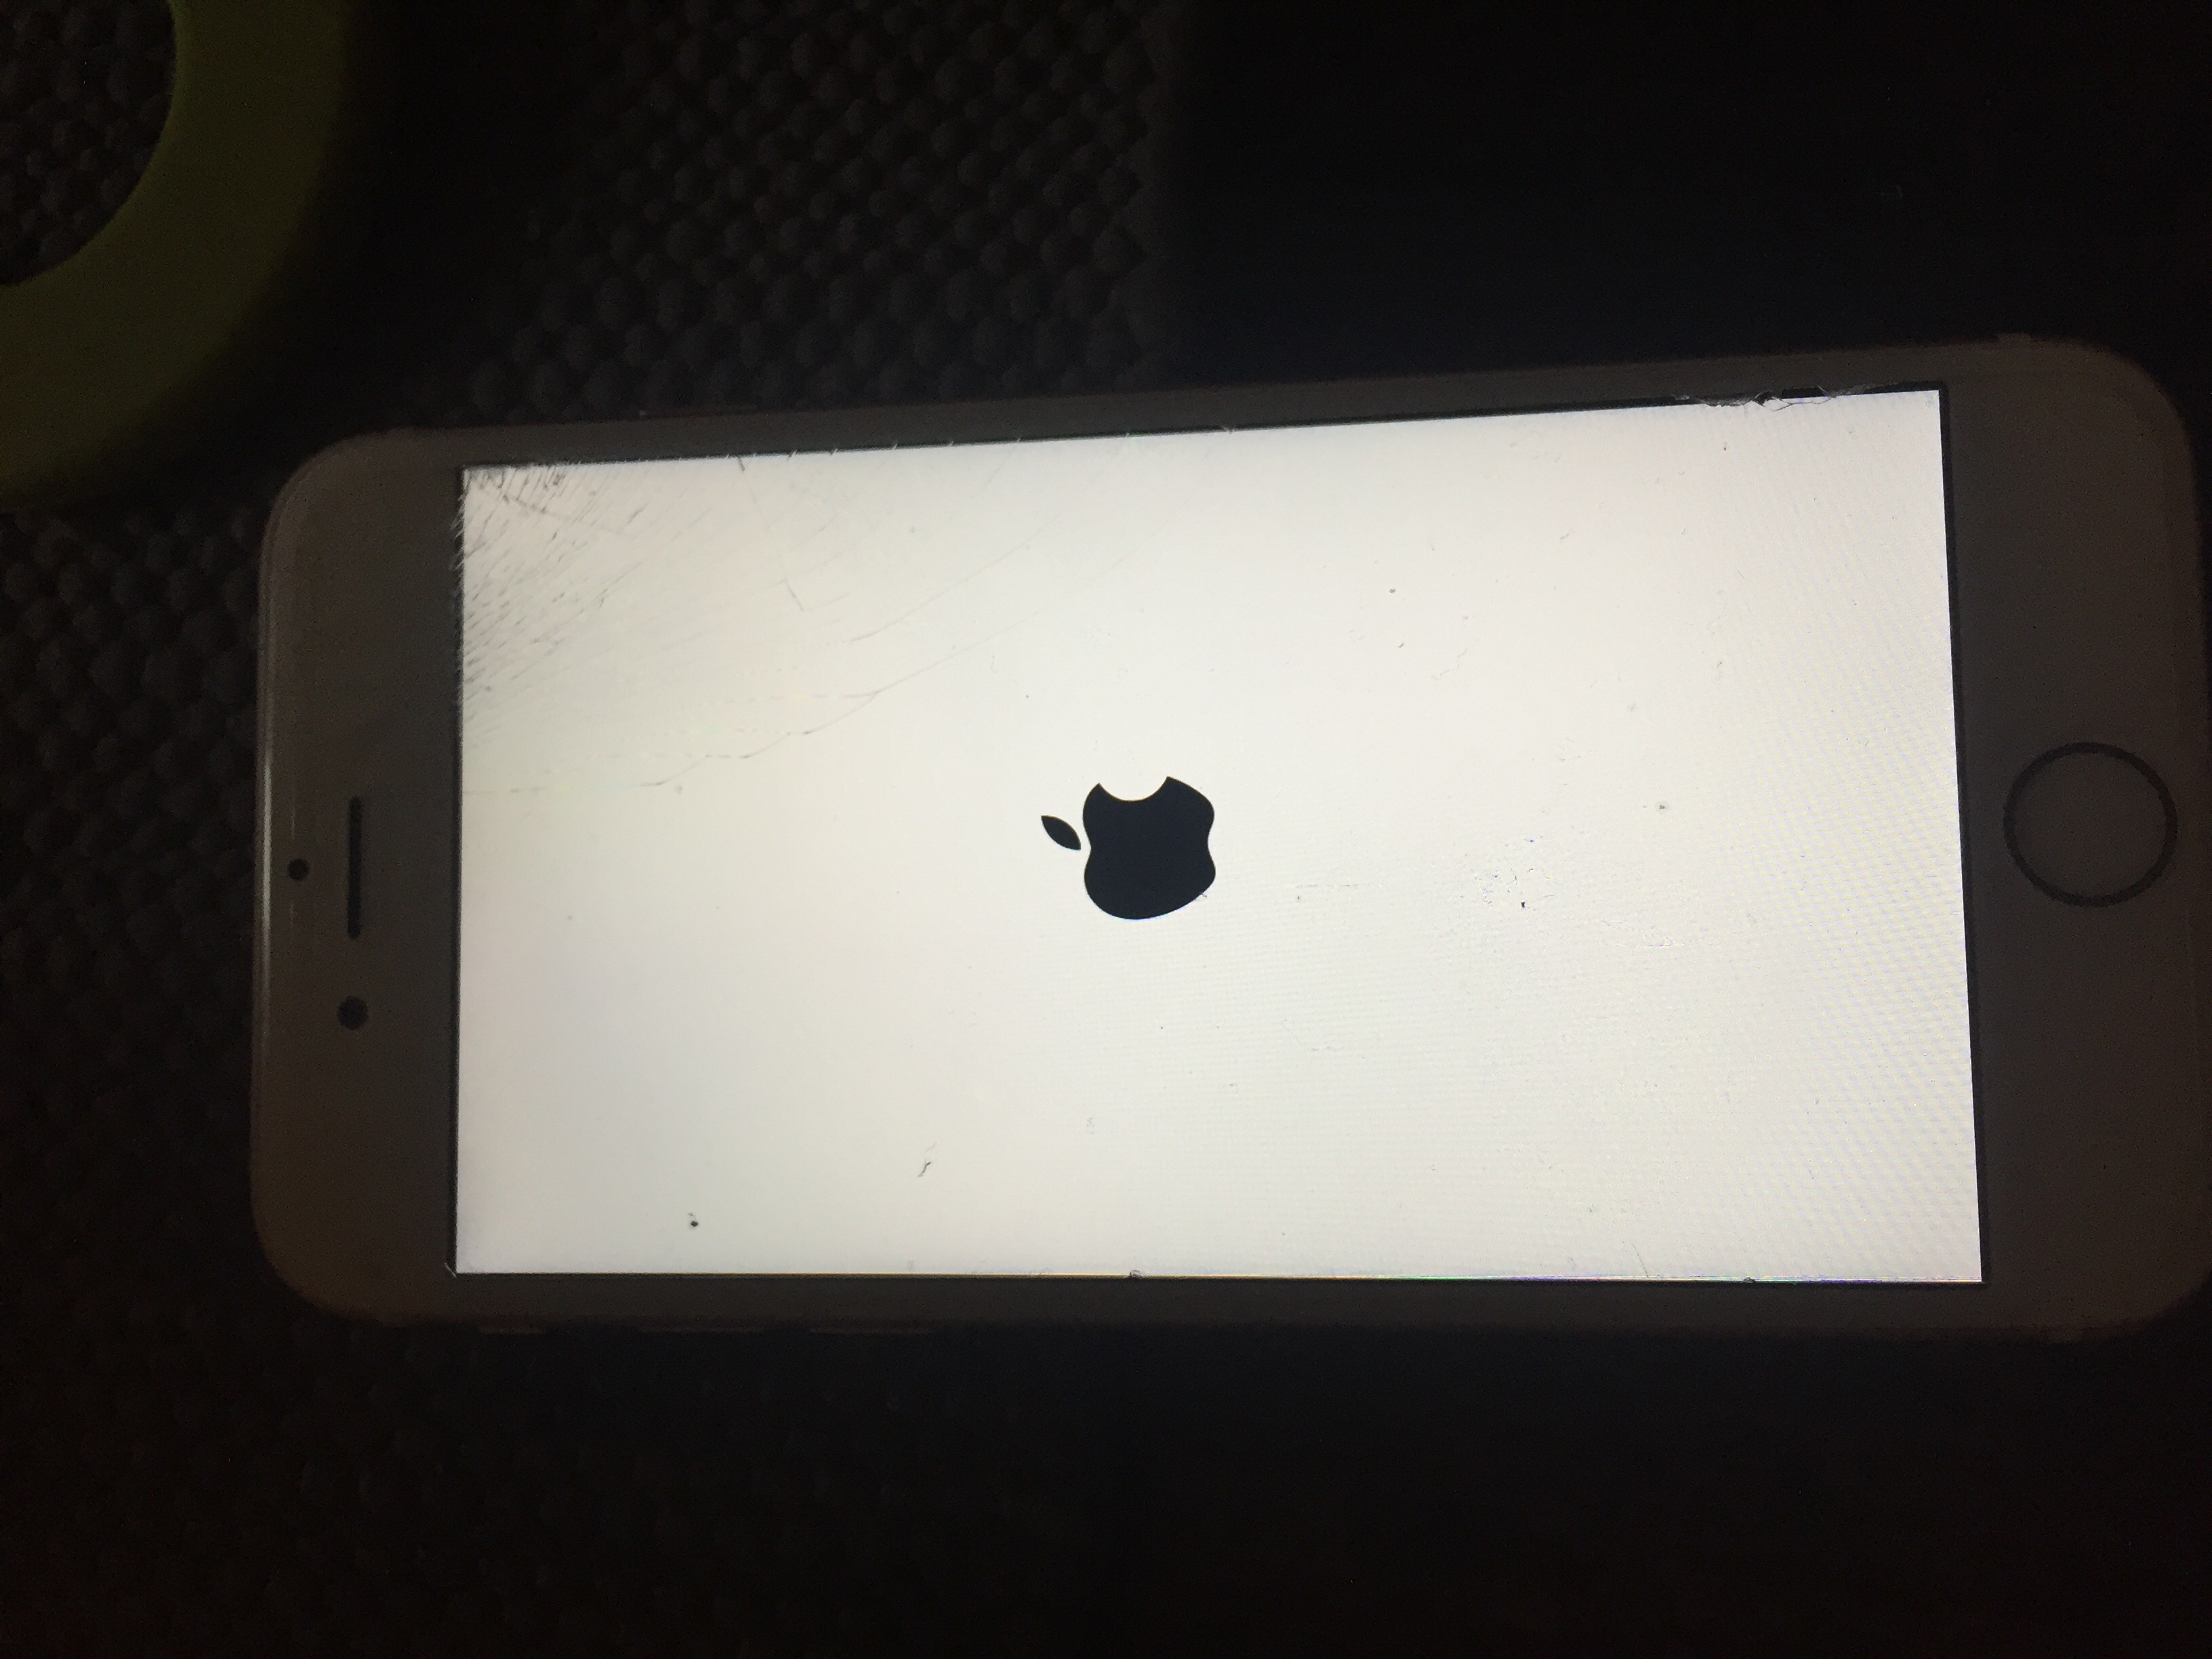 iphone 6 wont work. just showing apple lo… - Apple Community